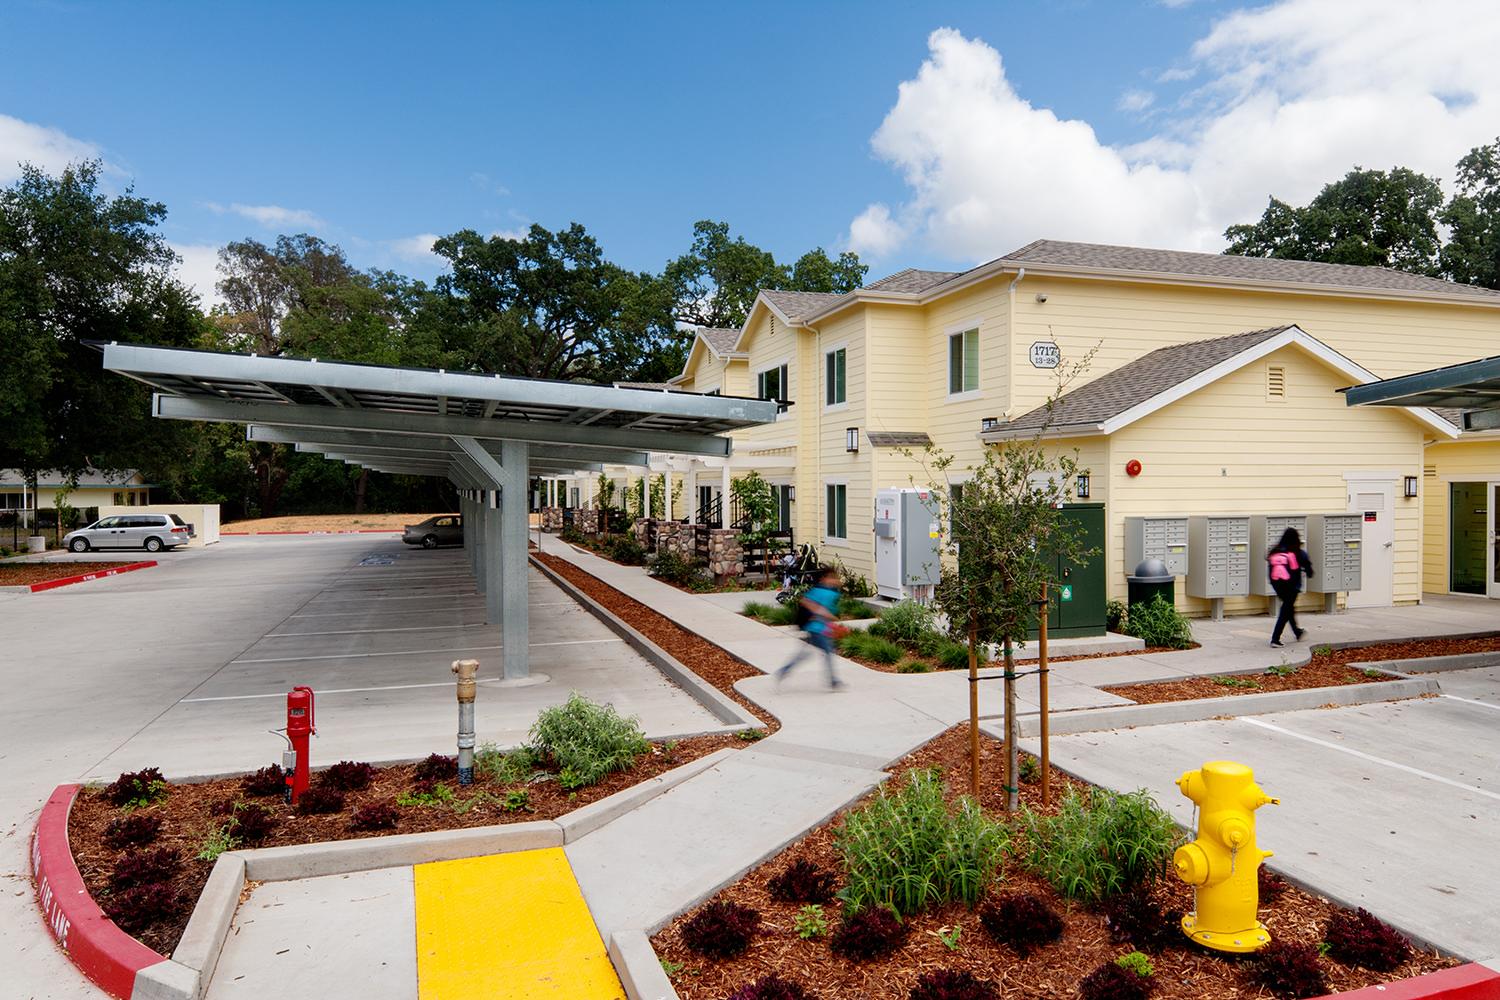 Solar panels covering parking spaces at Calistoga Family Apartments